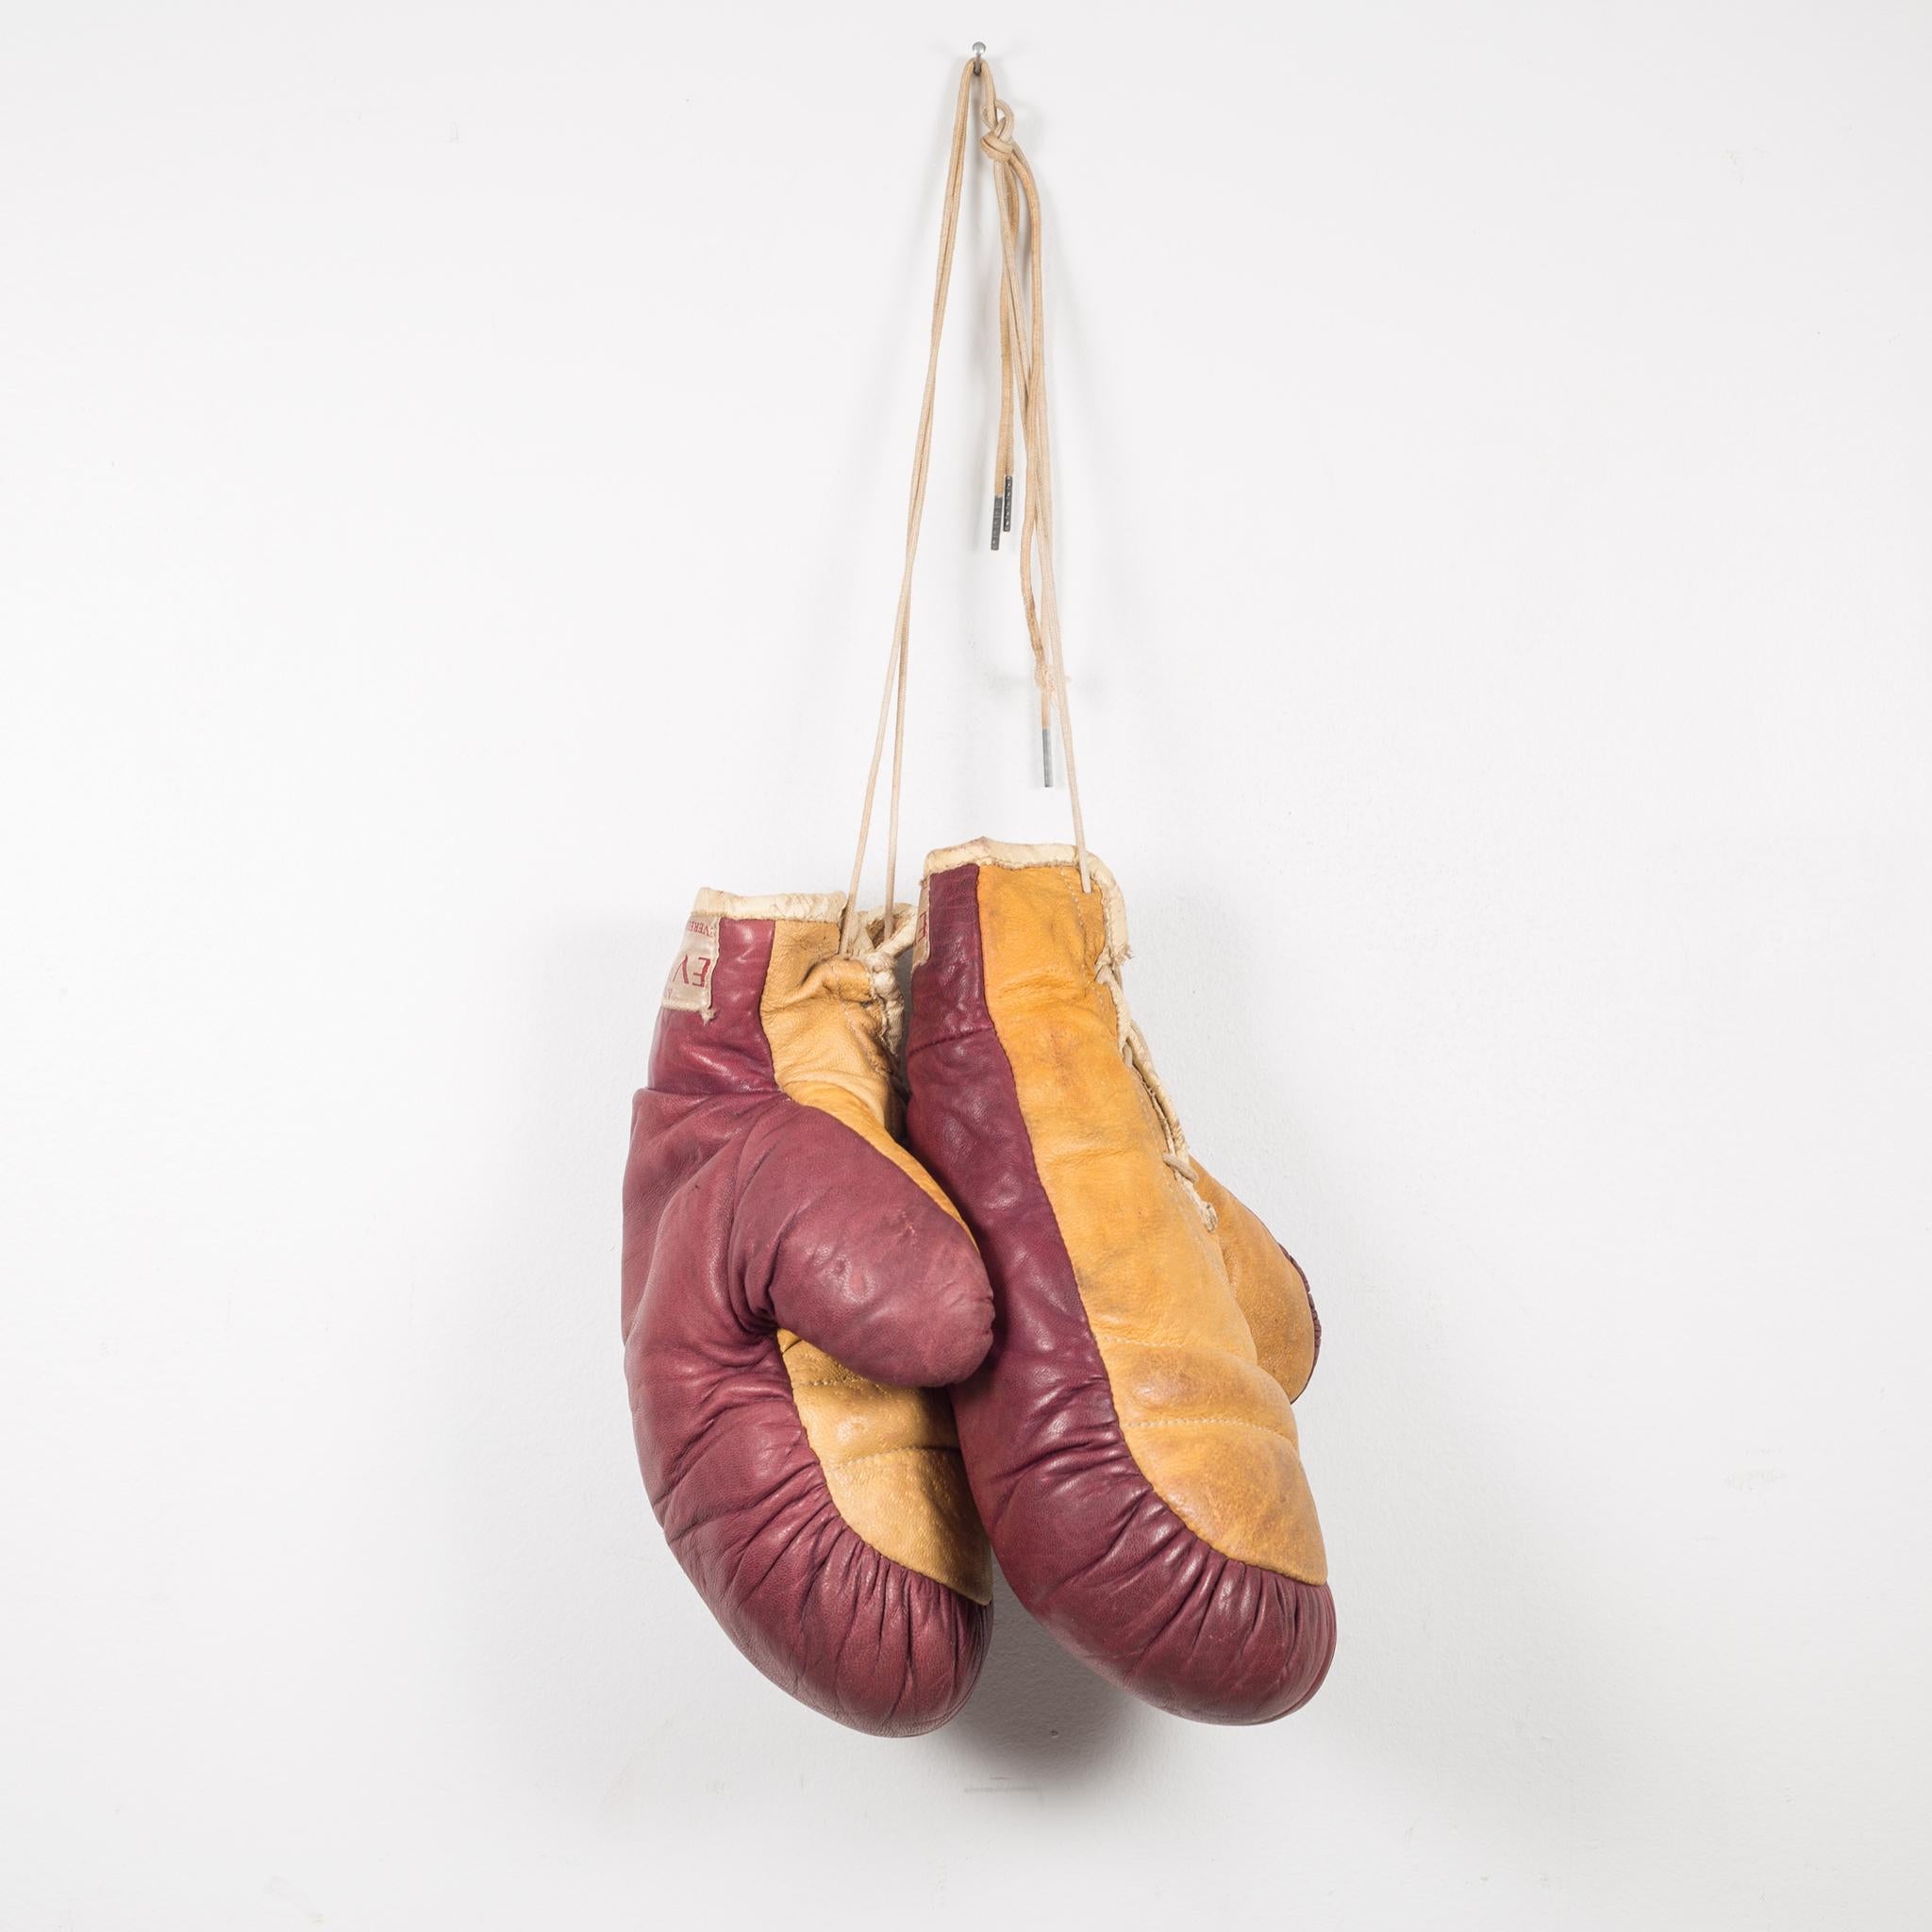 Industrial Pair of Vintage Horse Hair and Leather Boxing Gloves, circa 1940